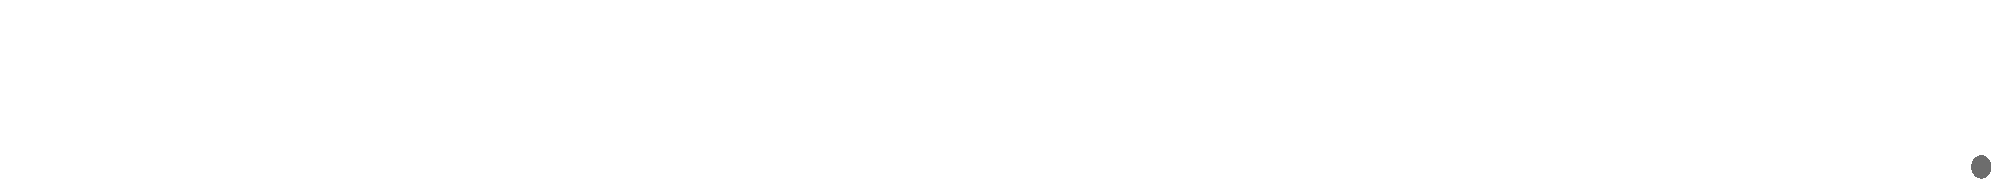 2000px-The_Wall_Street_Journal_Logo.svg_copy.png